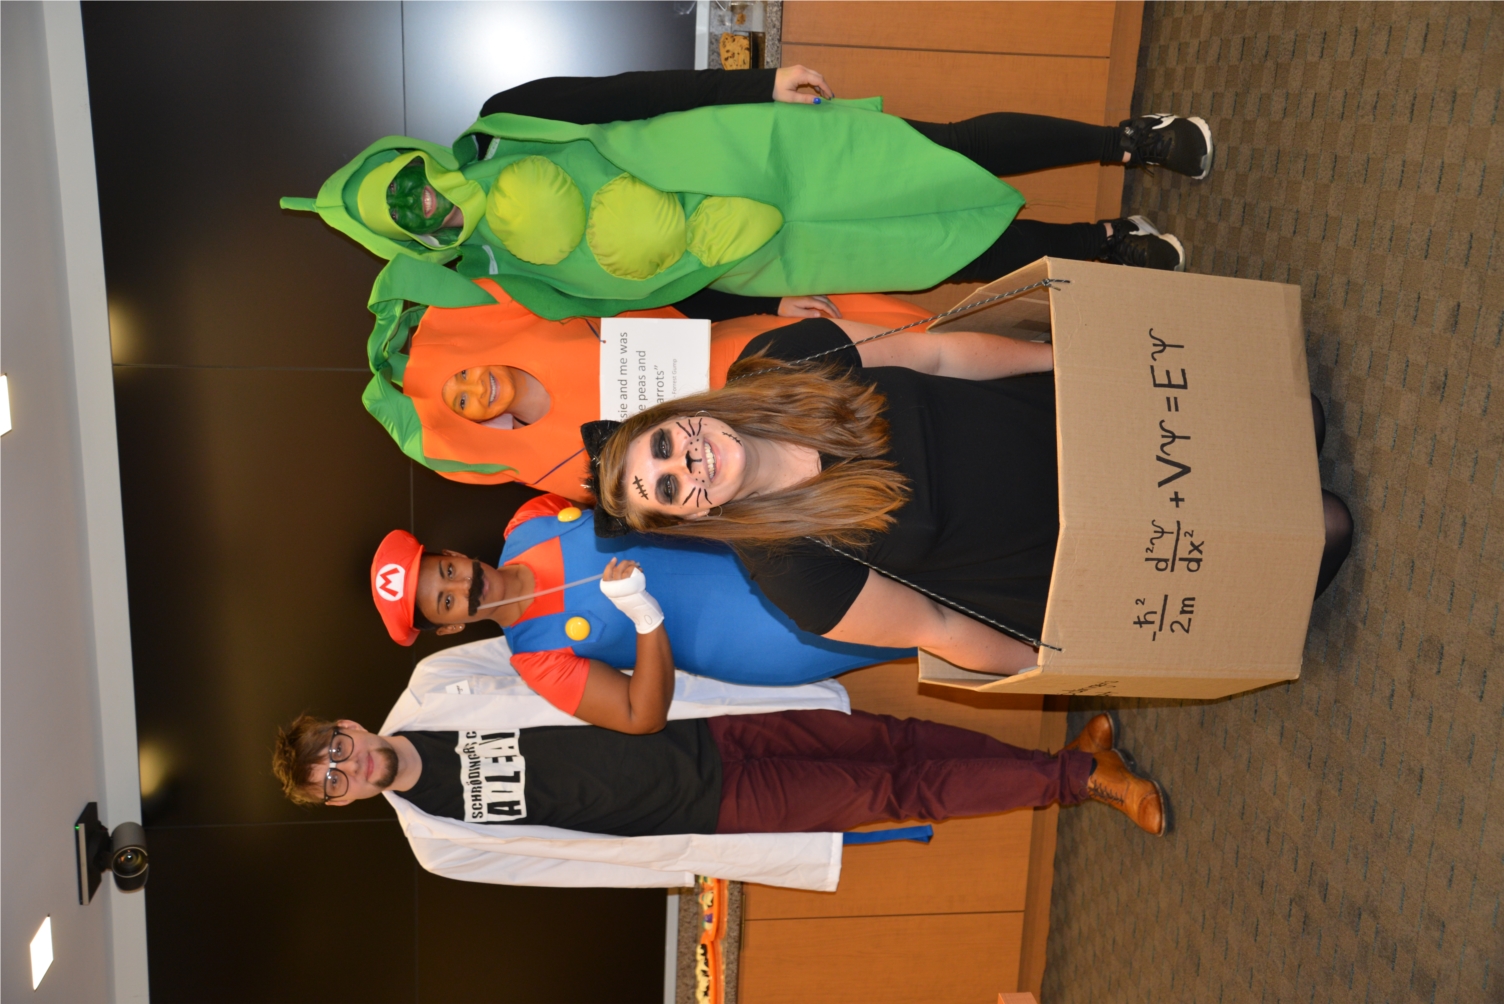 This winners of DAC's annual Halloween Chili Cook-Off for 2018